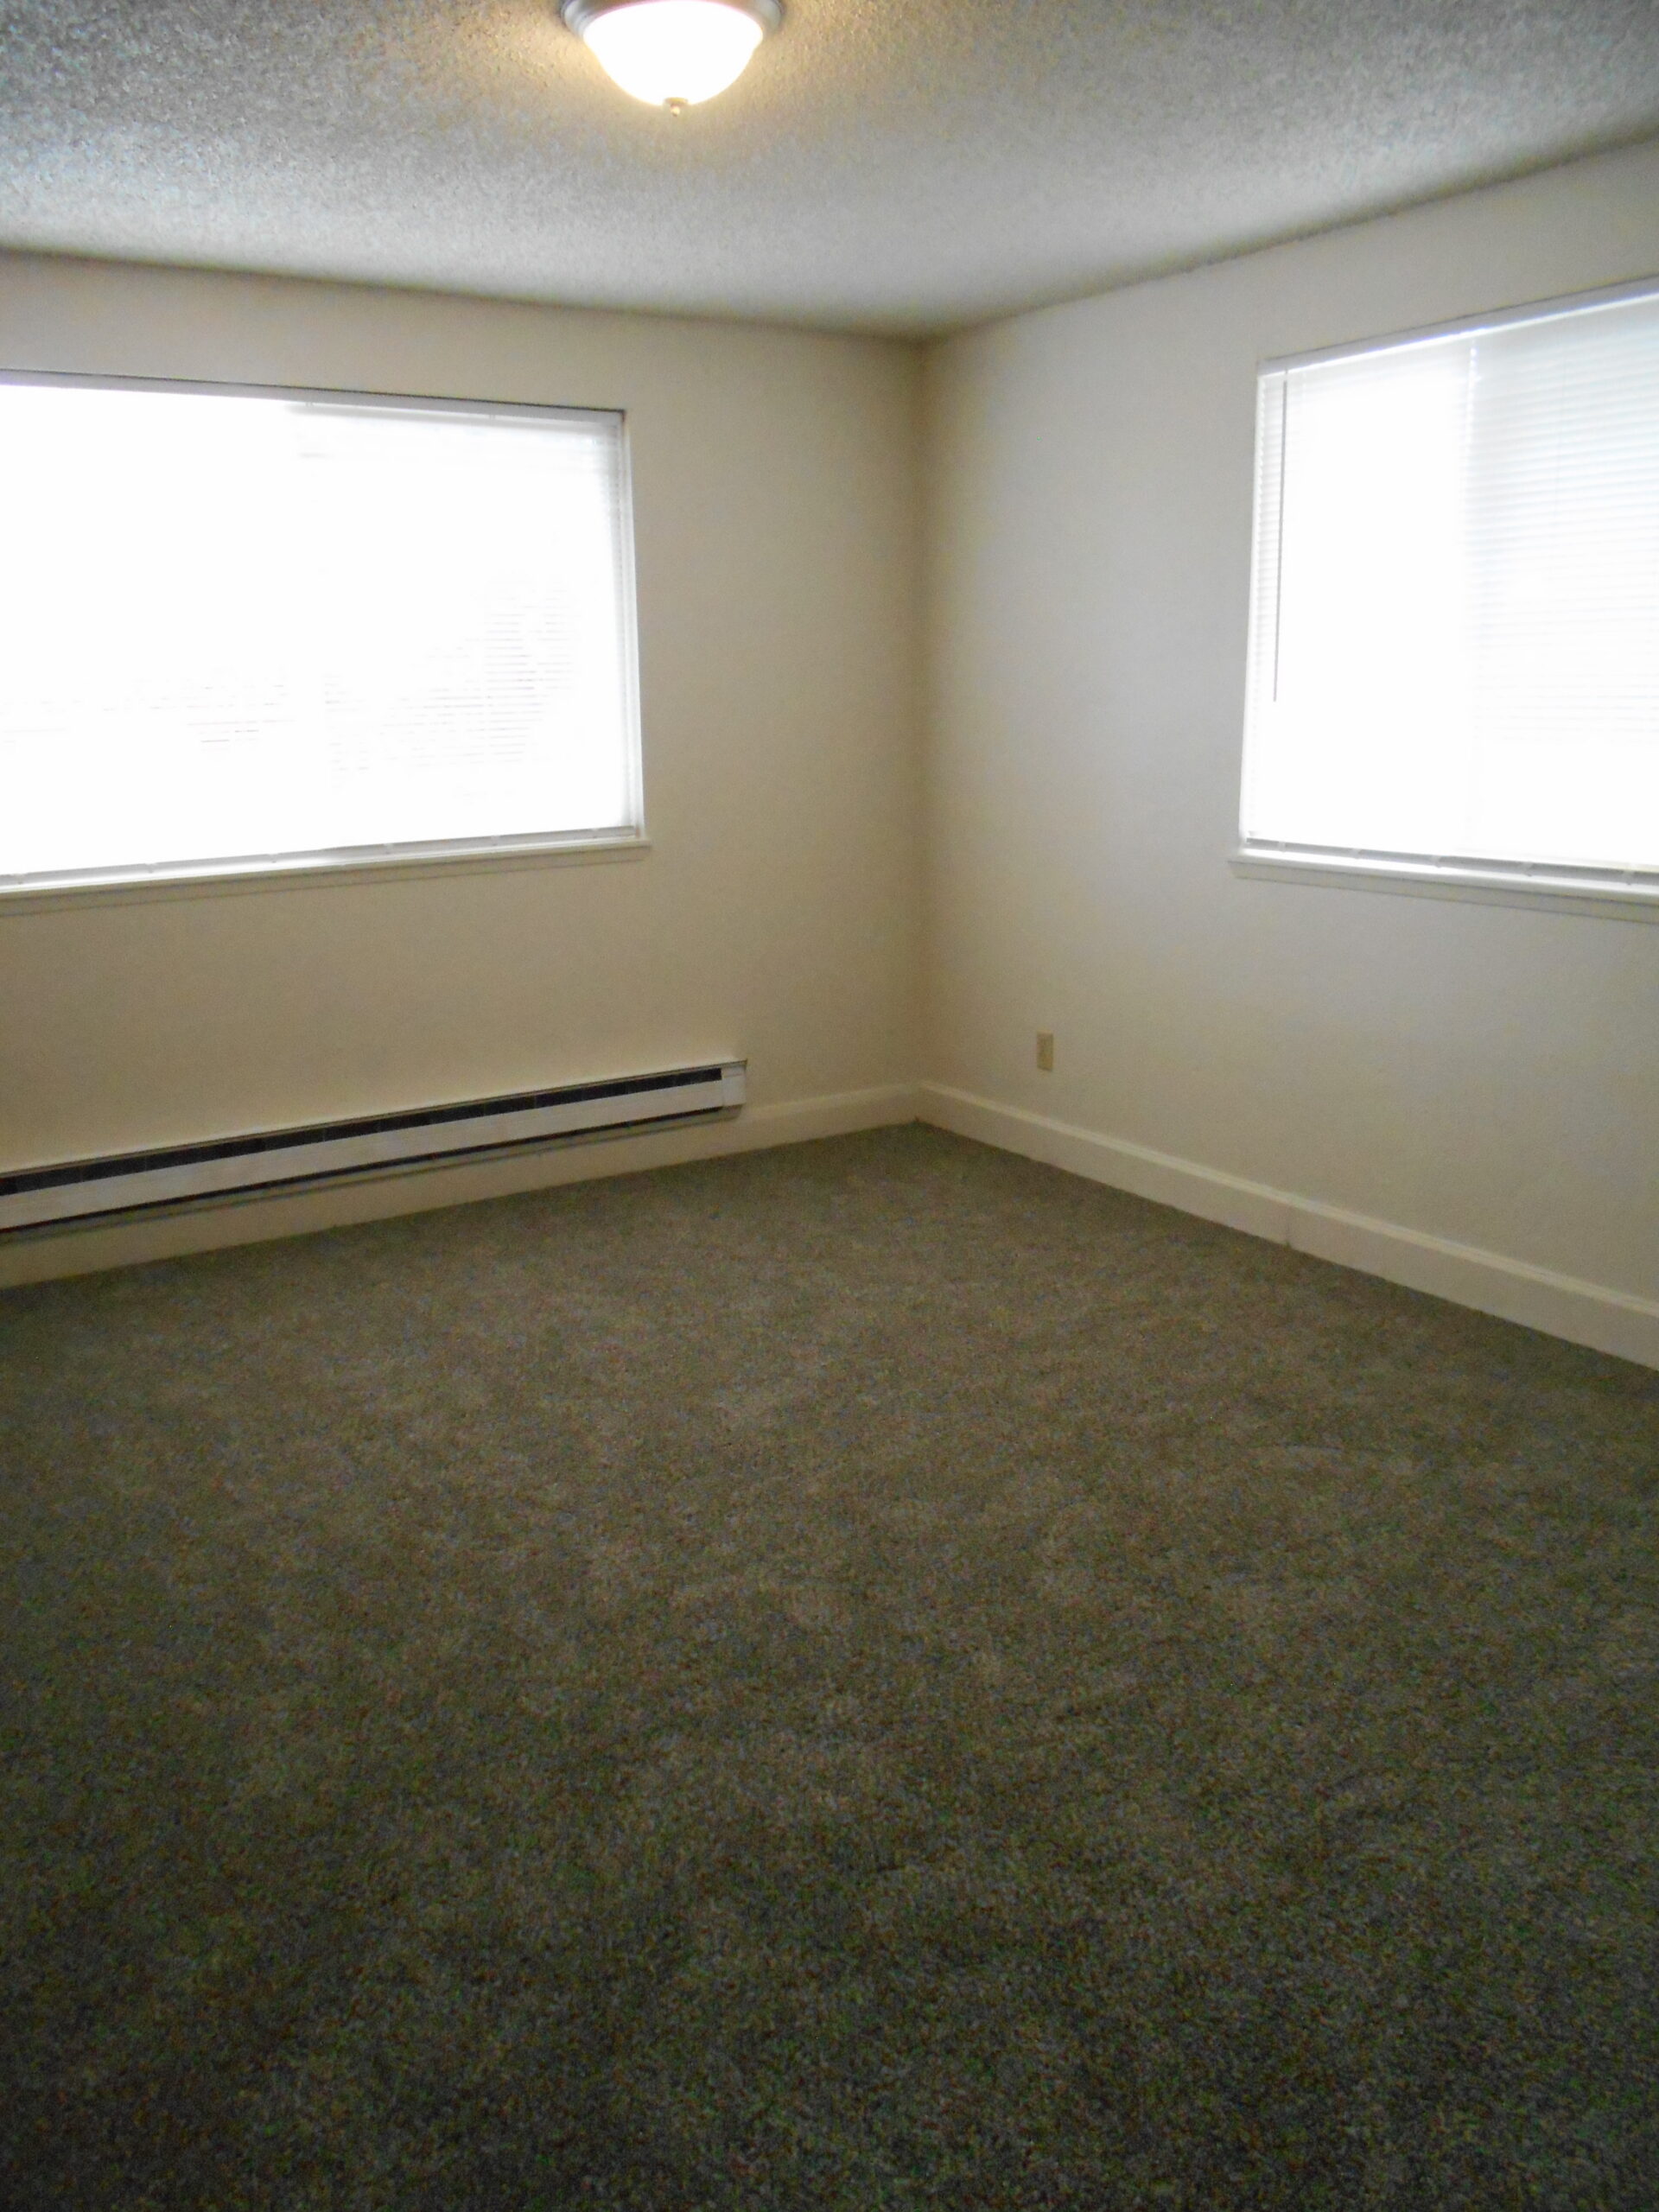 $1,195 – 1 Bedroom Duplex in Tacoma with FREE* APPLICATION FEES!!!